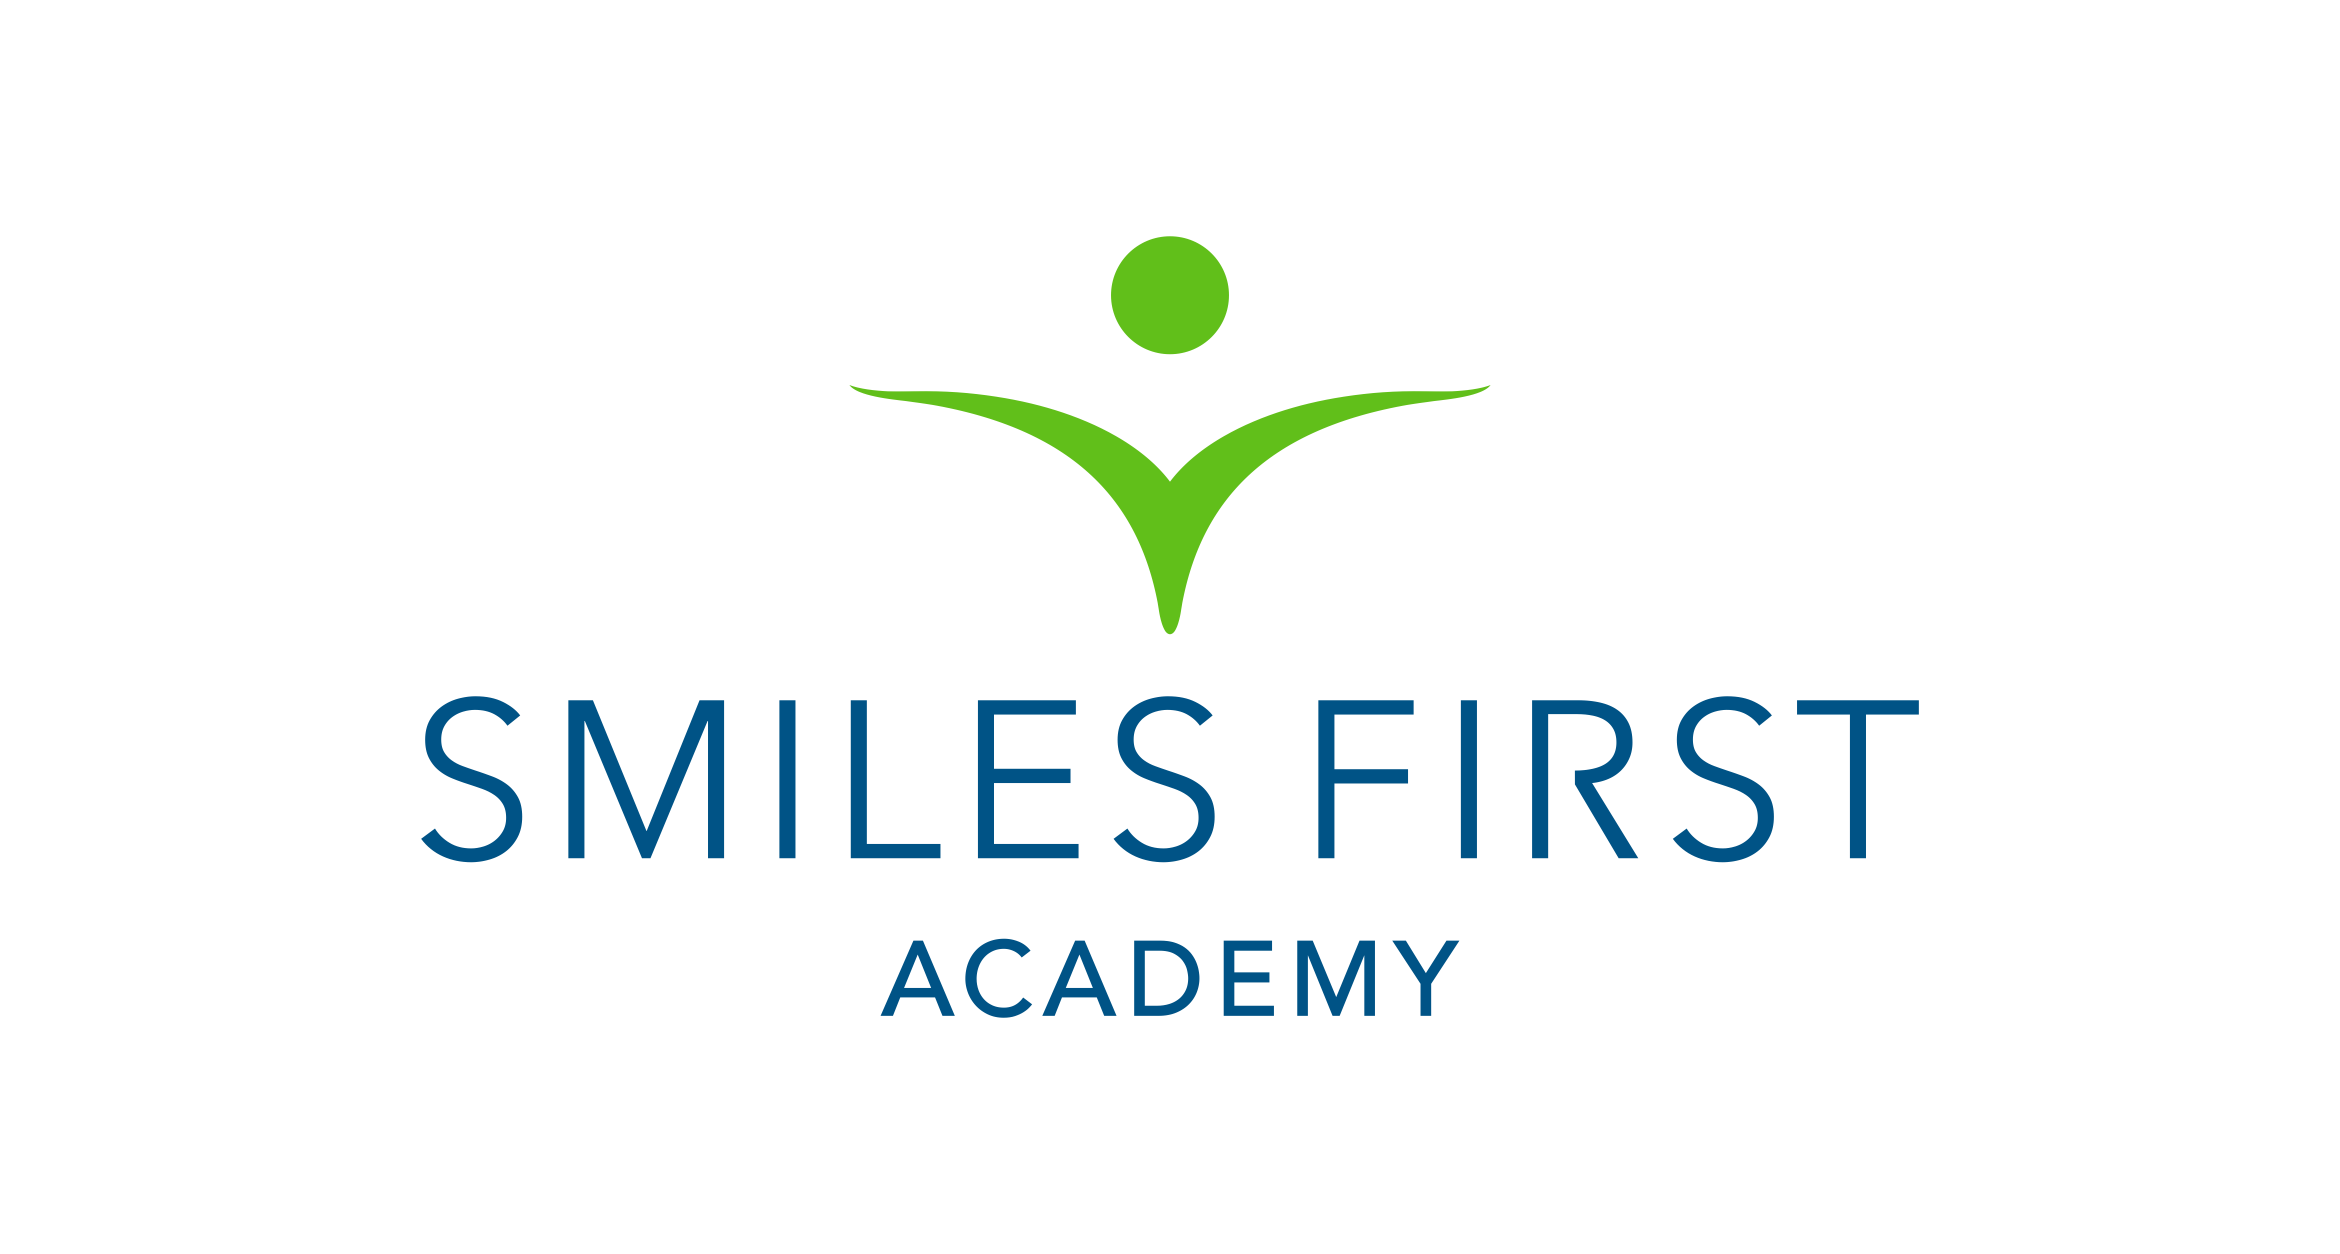 Smiles First Academy